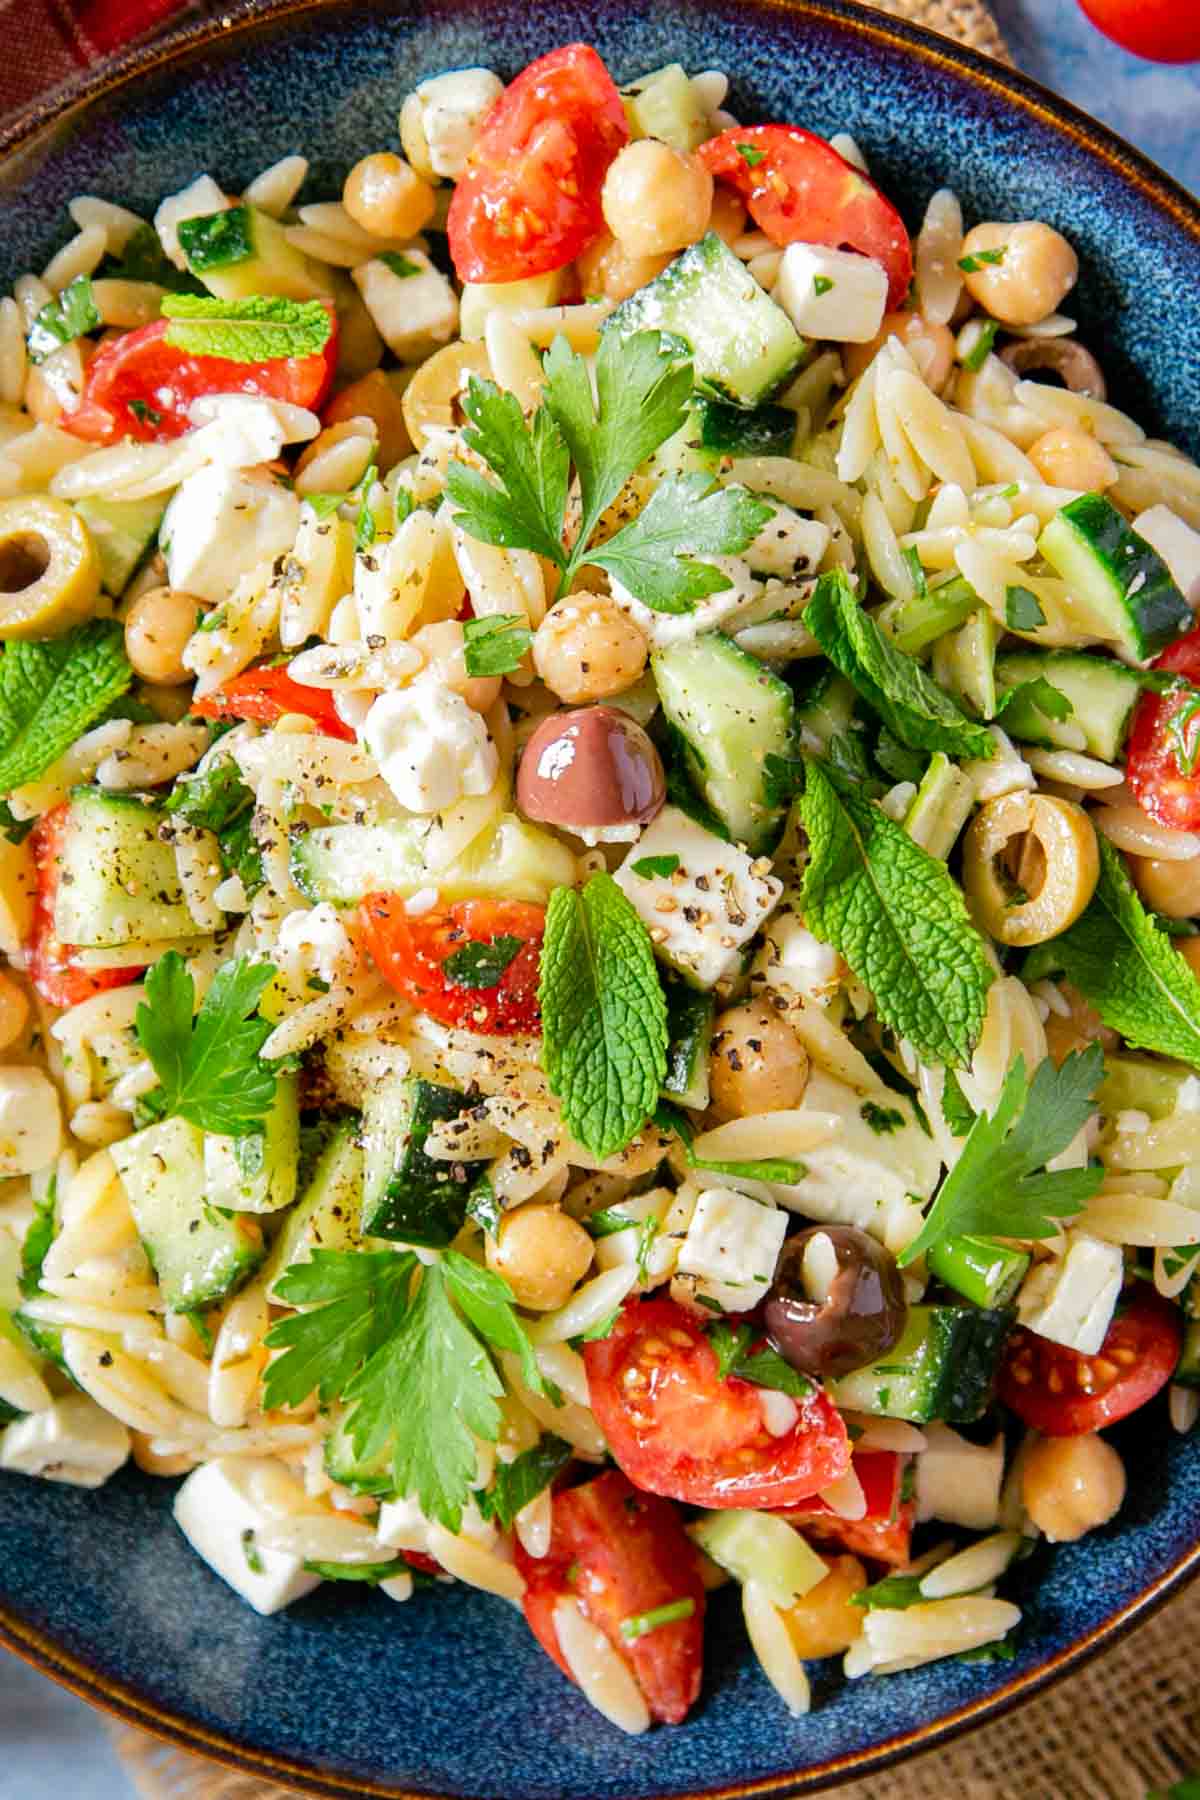 A bowl of Greek orzo salad in close up, full of feta, fresh vegetables, chickpeas and herbs.